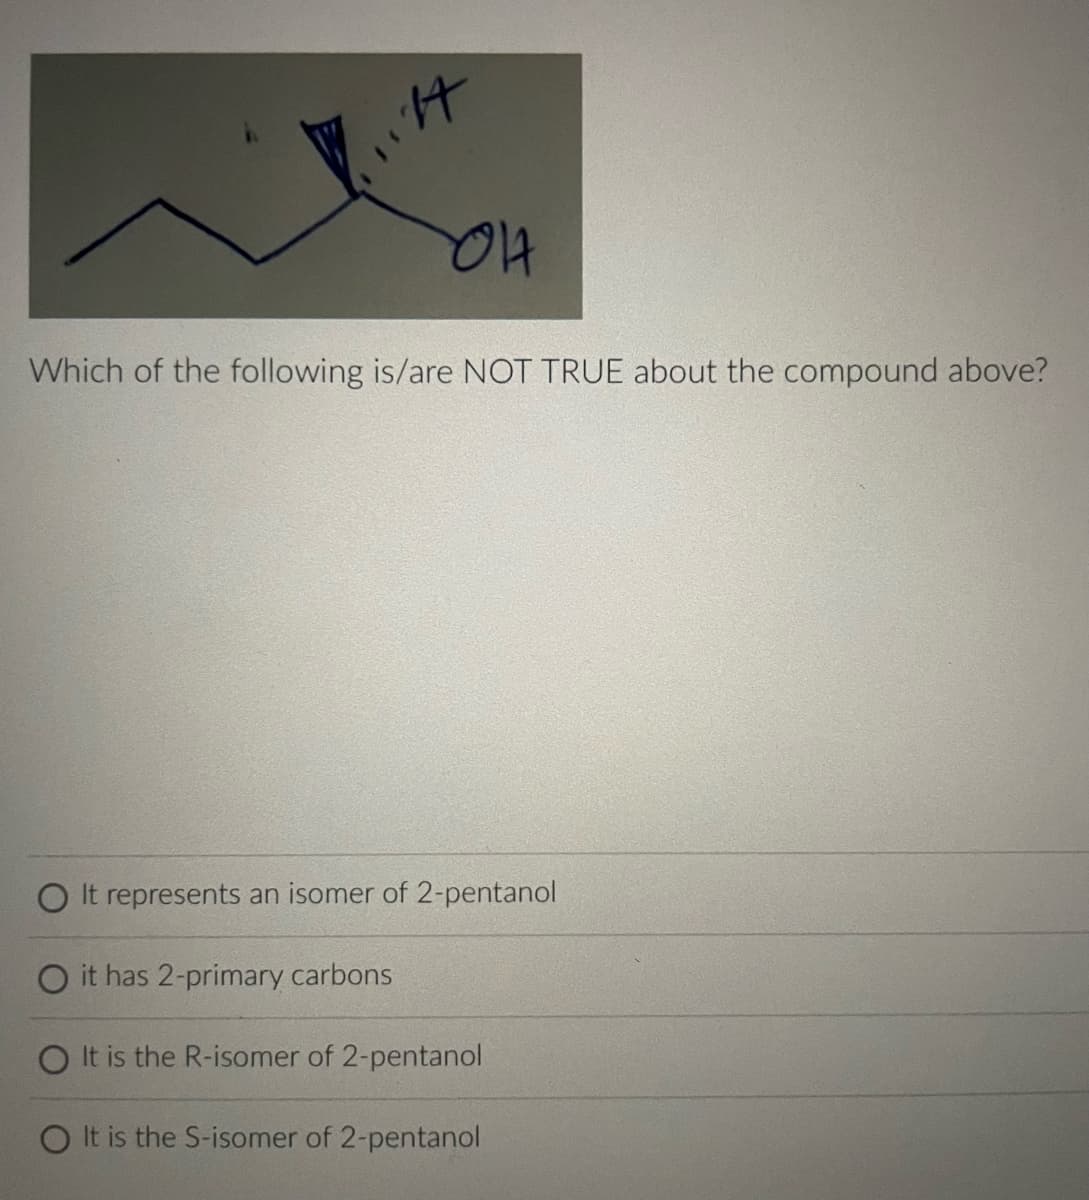 1.14
OA
Which of the following is/are NOT TRUE about the compound above?
O It represents an isomer of 2-pentanol
O it has 2-primary carbons
O It is the R-isomer of 2-pentanol
O It is the S-isomer of 2-pentanol